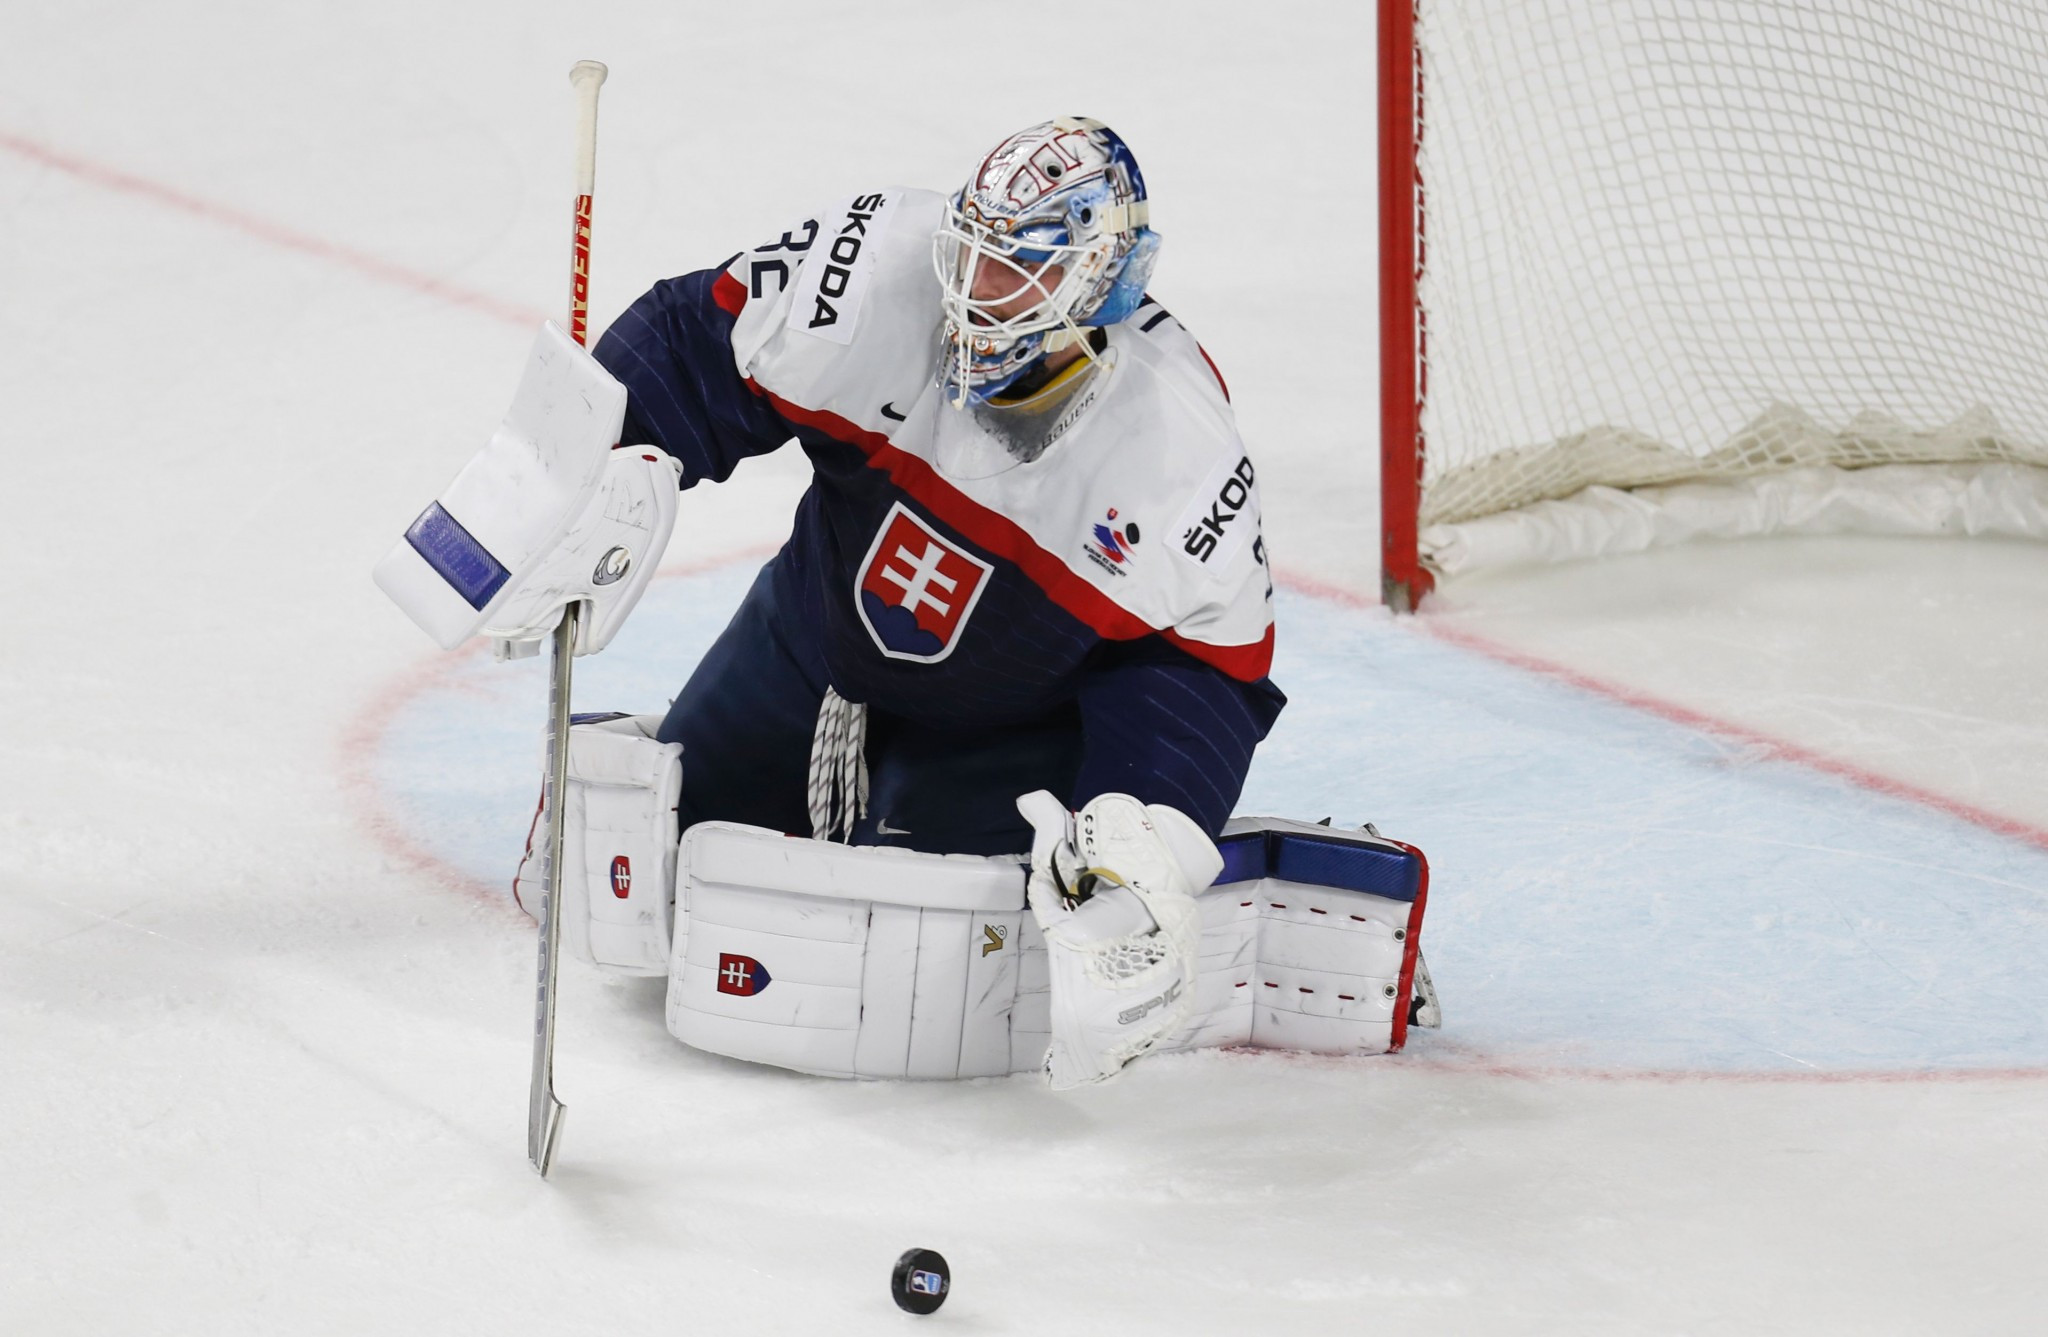 Slovakia's best result in the men's Olympic ice hockey tournament came at Vancouver 2010, finishing fourth ©Getty Images